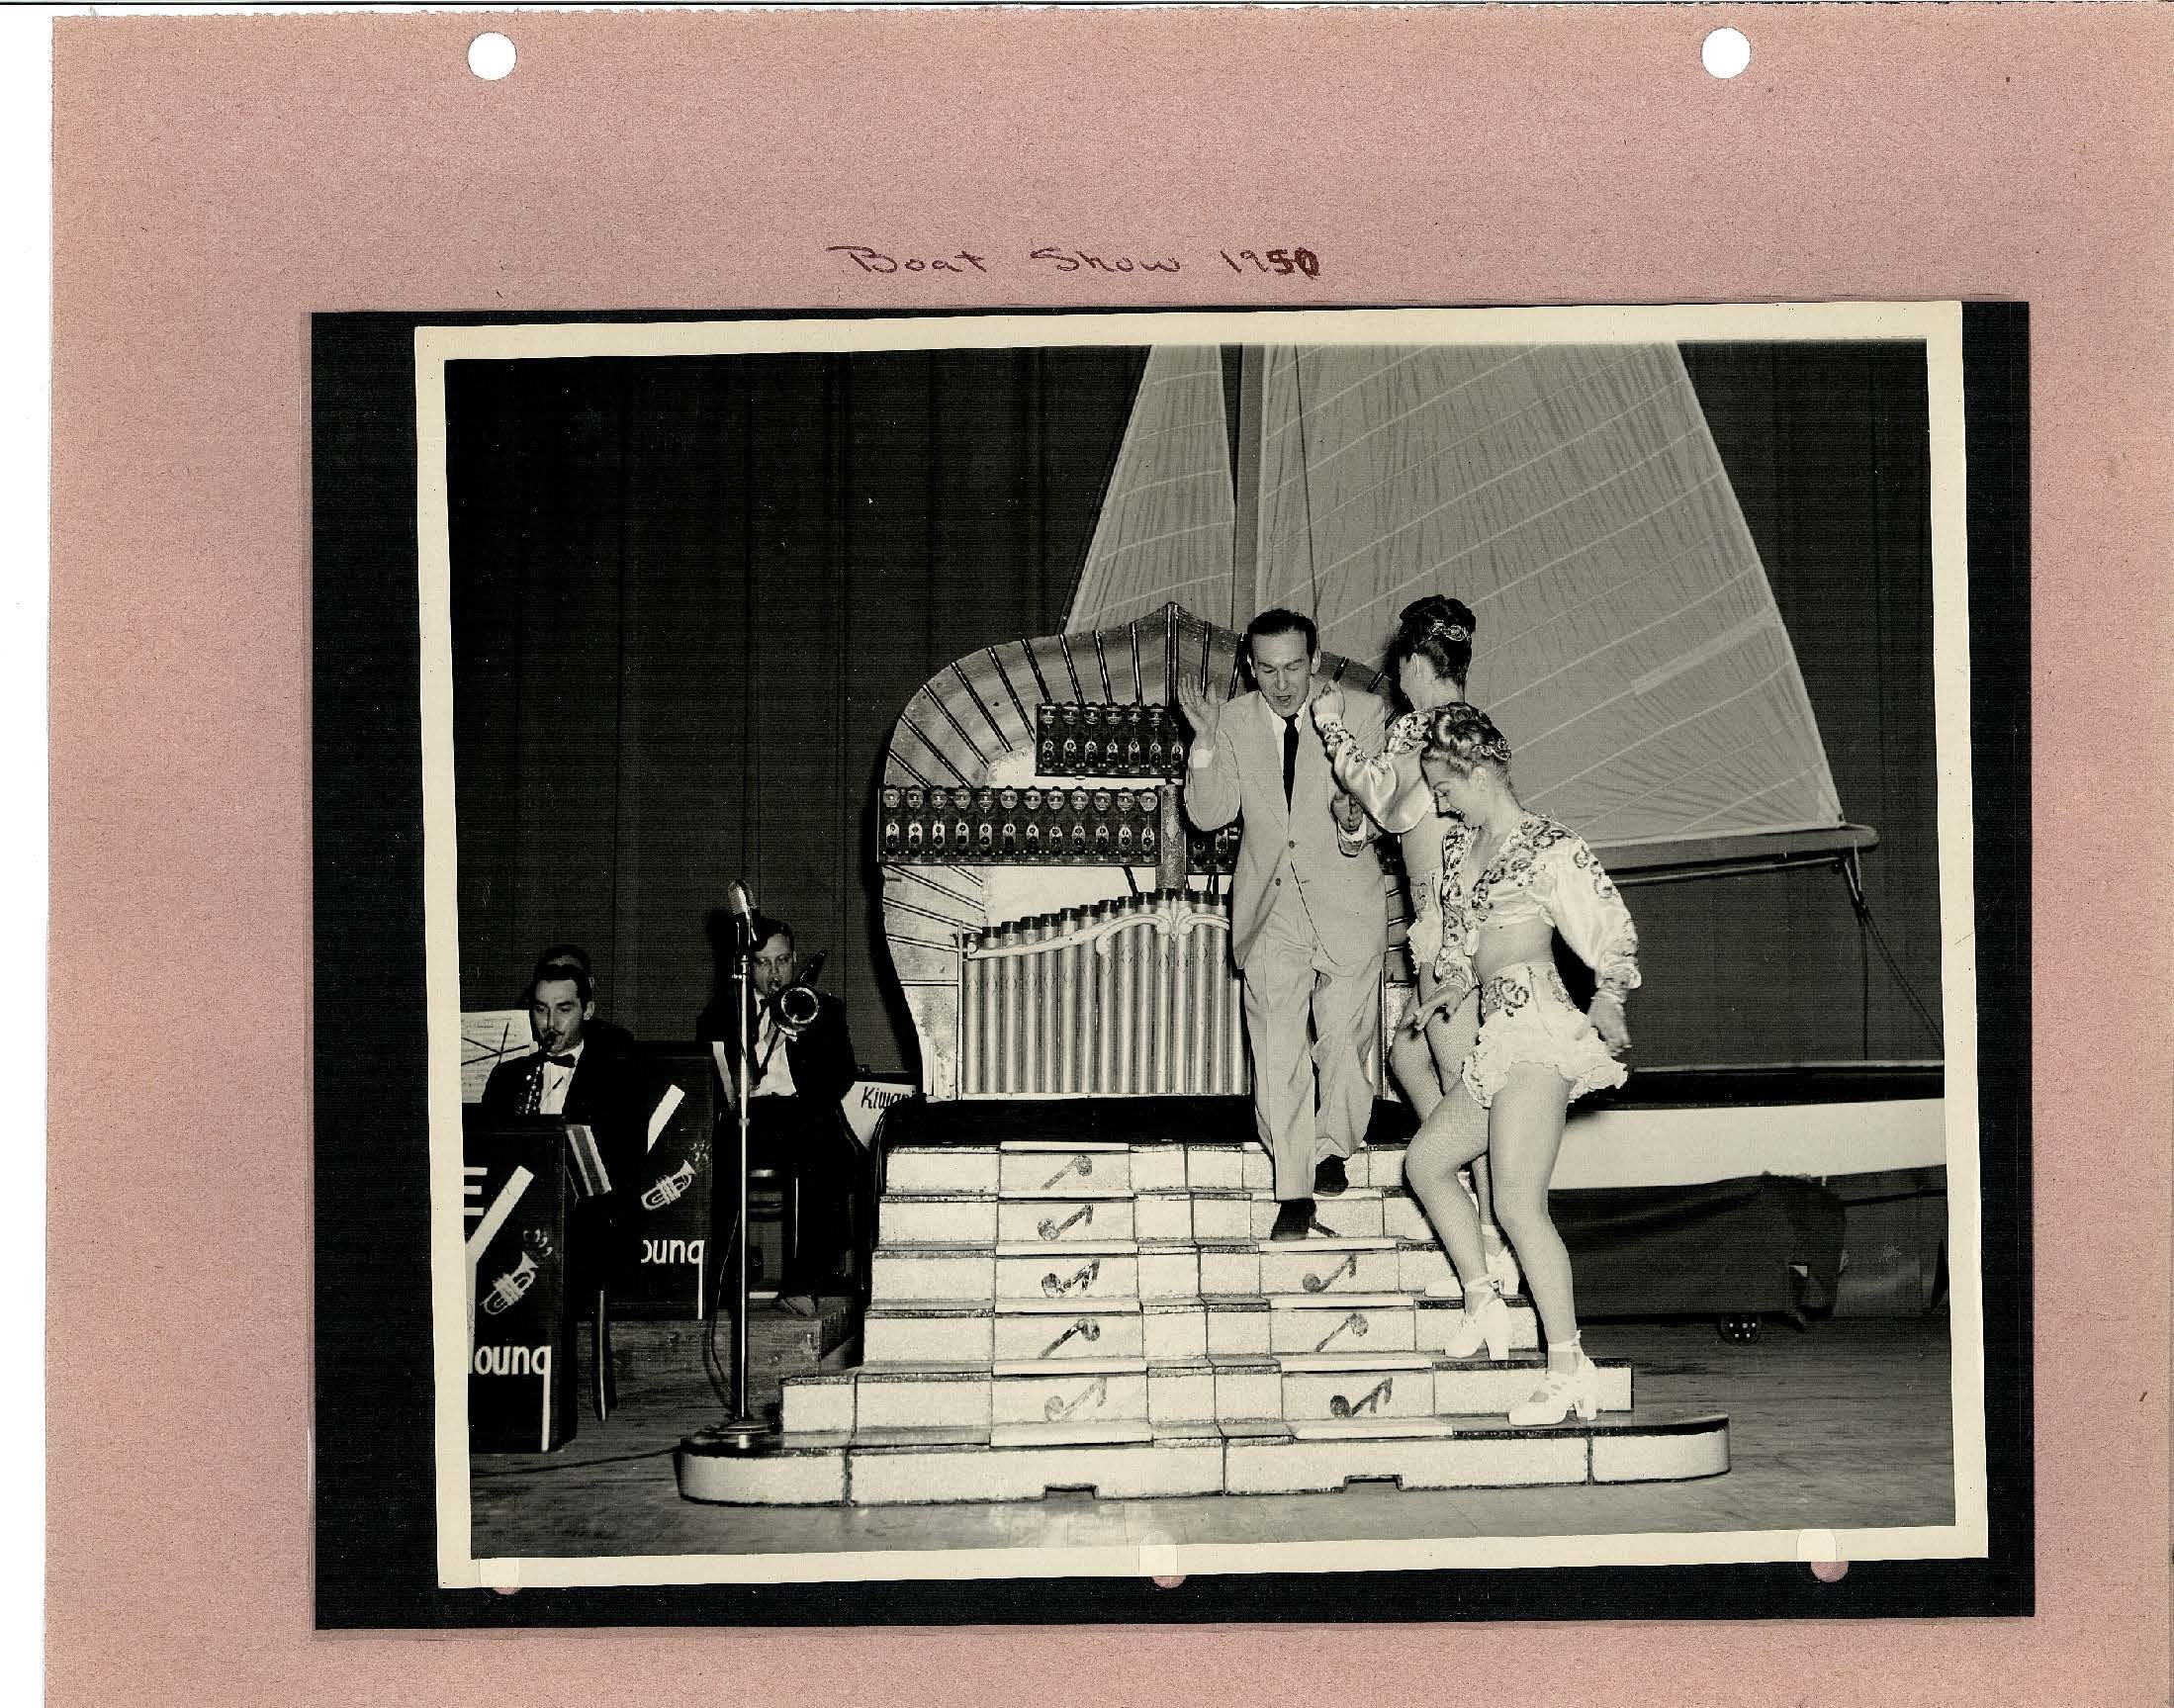 Photo taken at Boat show 1950 of stage performance